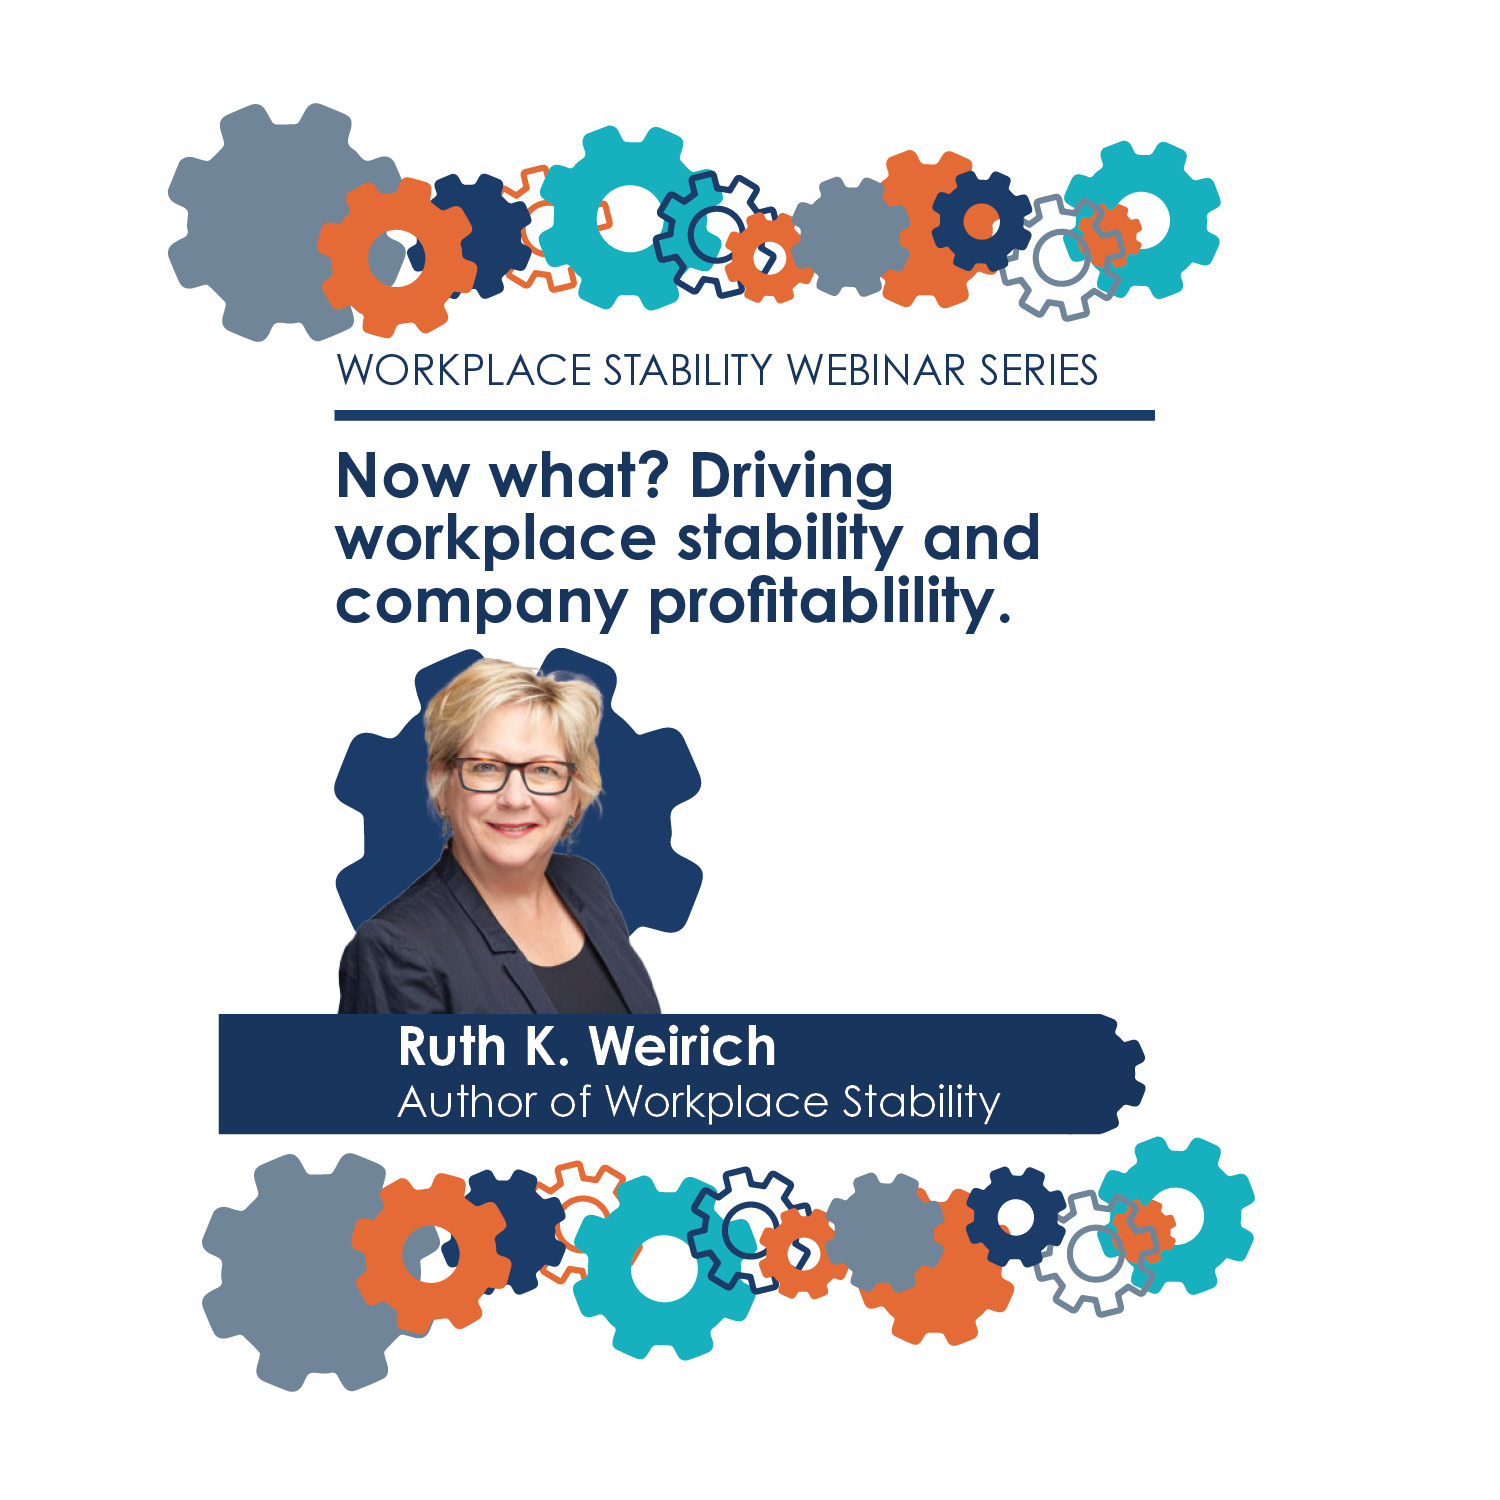 Workplace Stability Webinar 6: Now what? Driving workplace stability and company profitability.